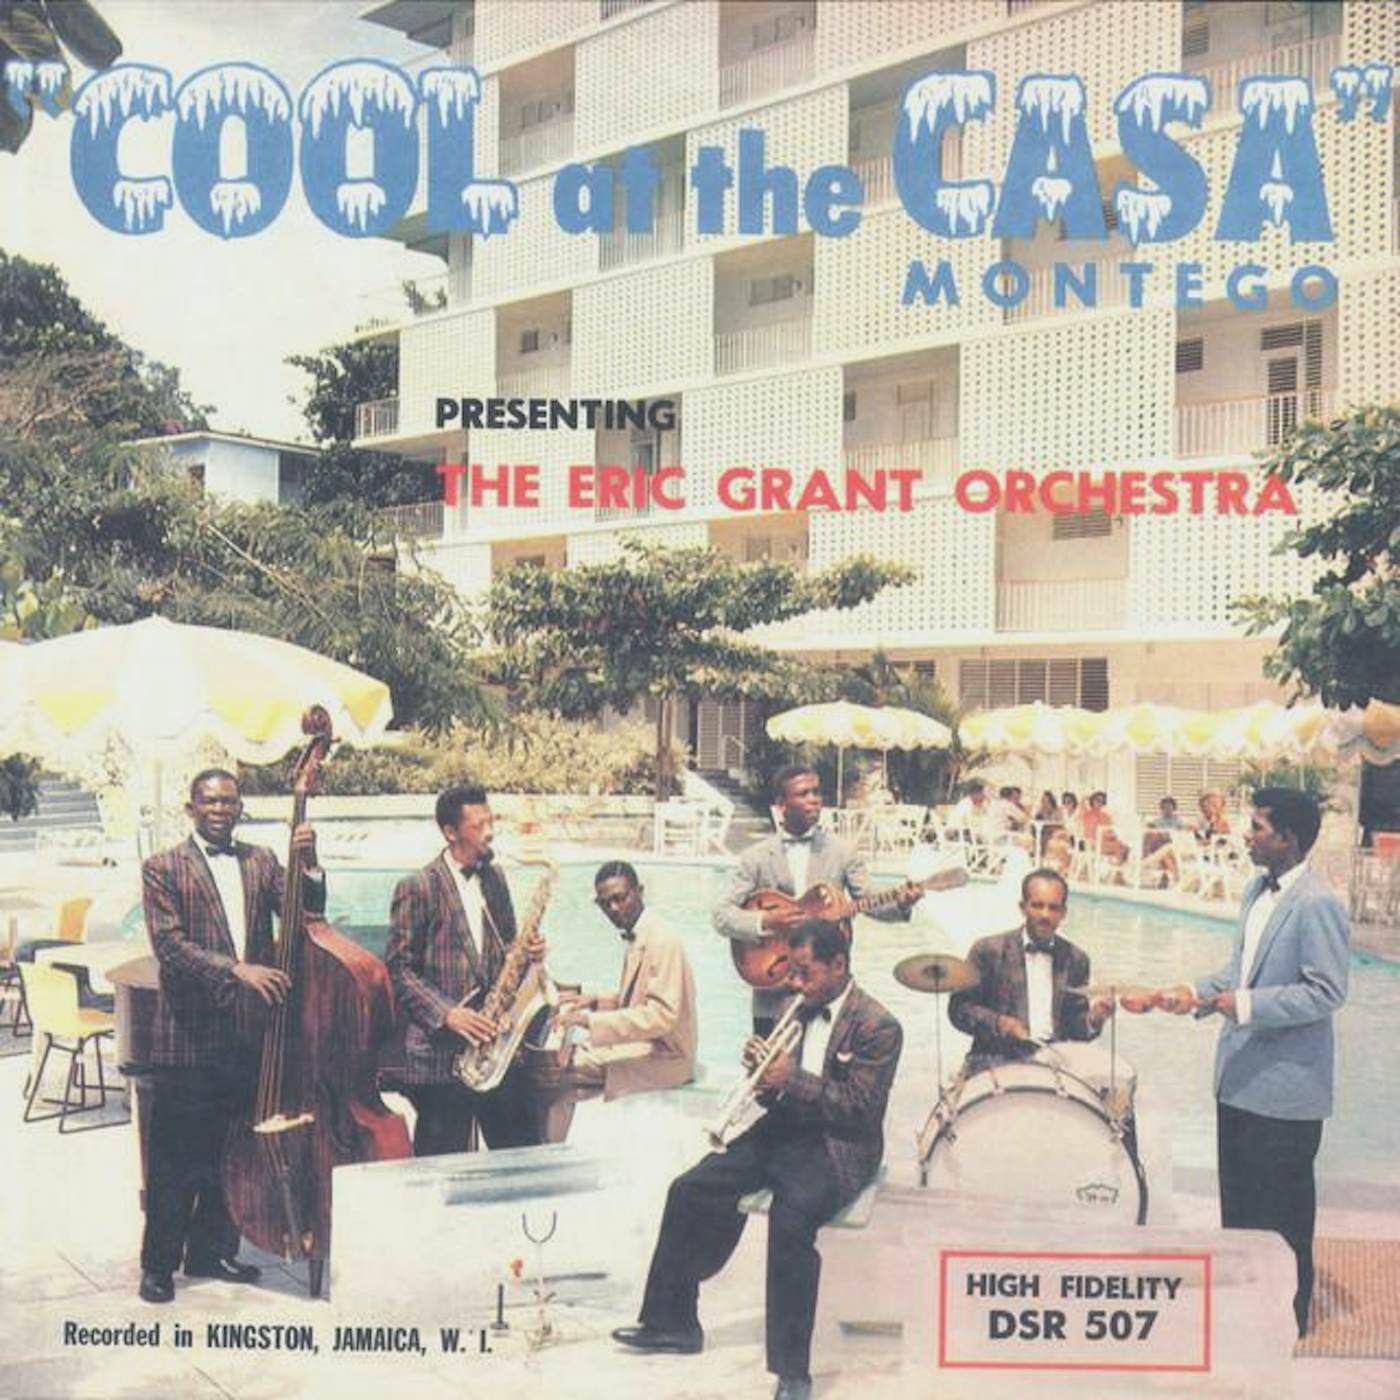 The Eric Grant Orchestra